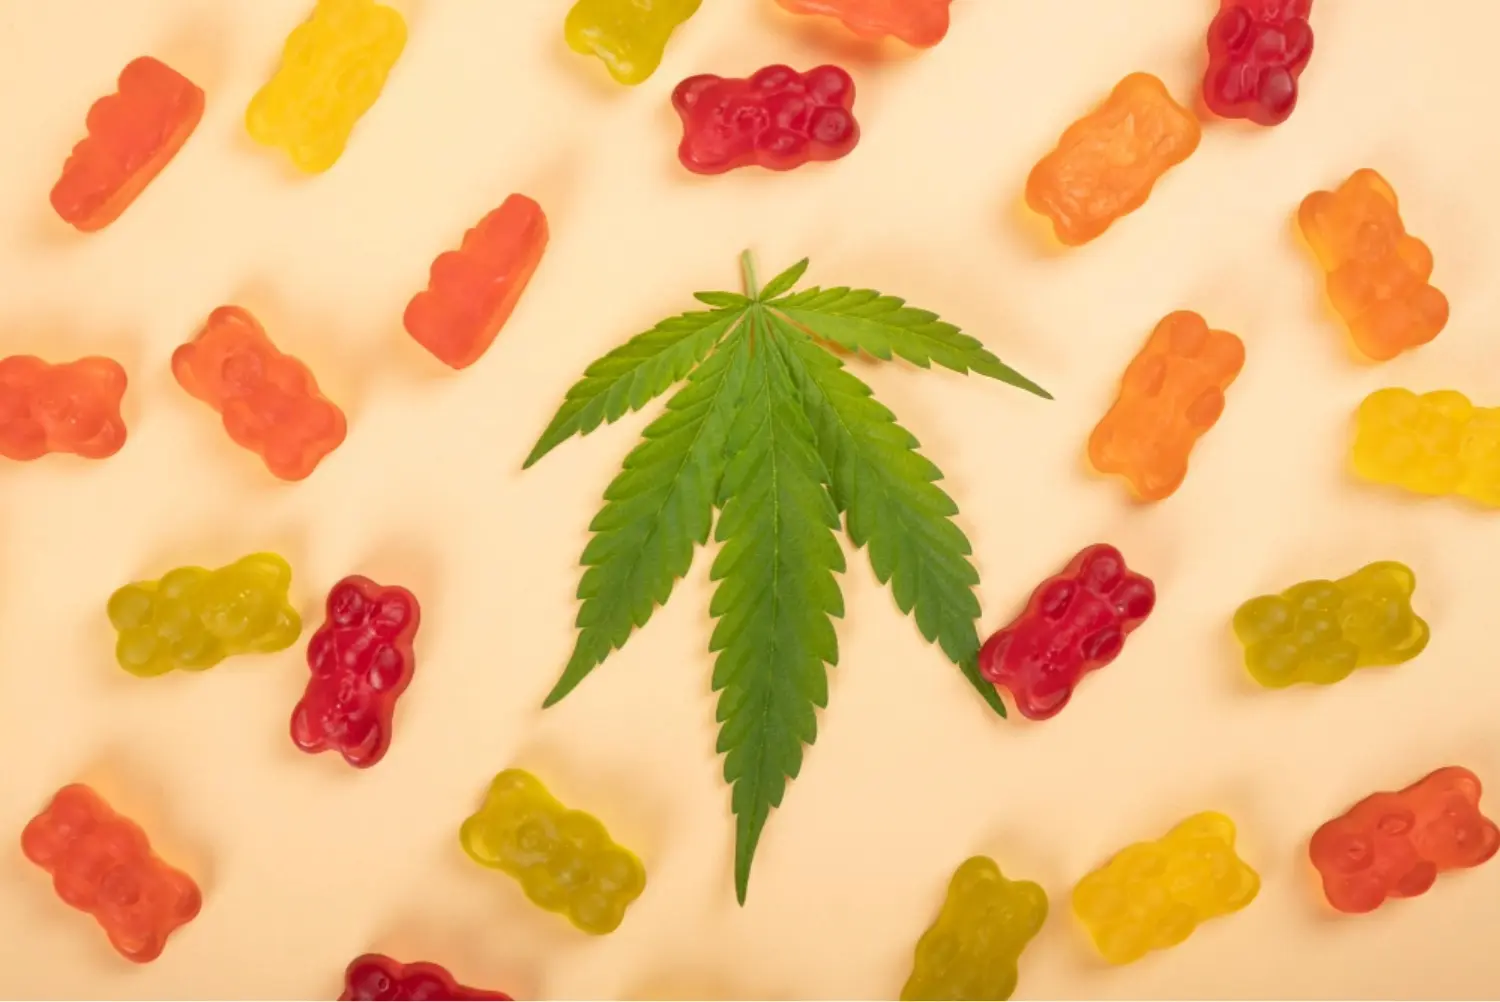 dosage and potency of cannabis gummies